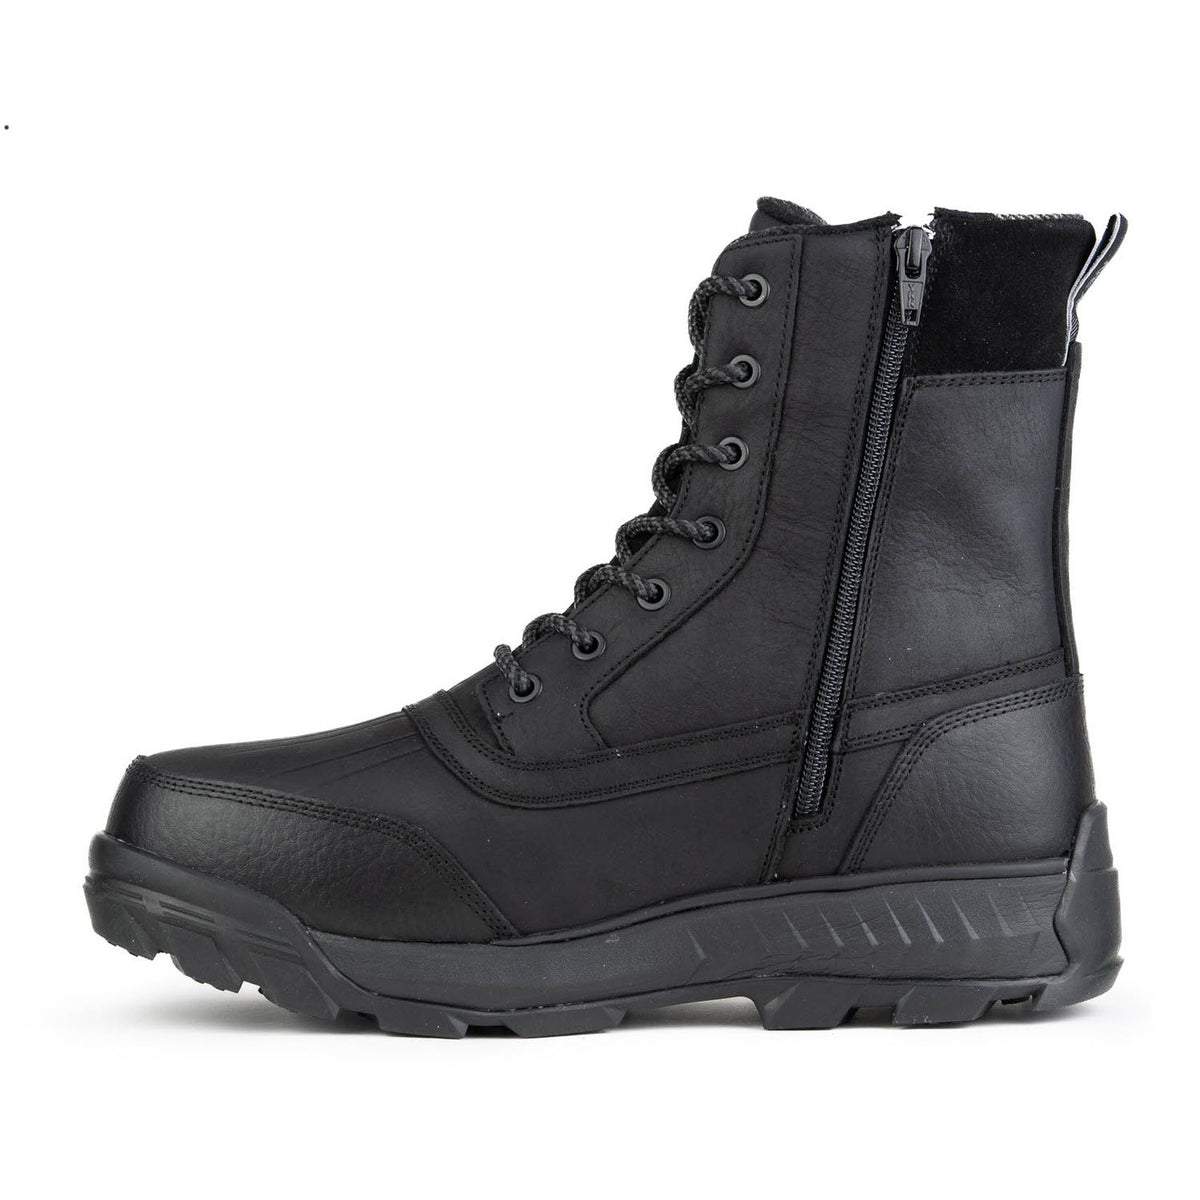 NEWGRIP ICE MONT BLANC 3.0 BLACK - MENS tactical boot with waterproof uppers and a side zipper, isolated on a white background.